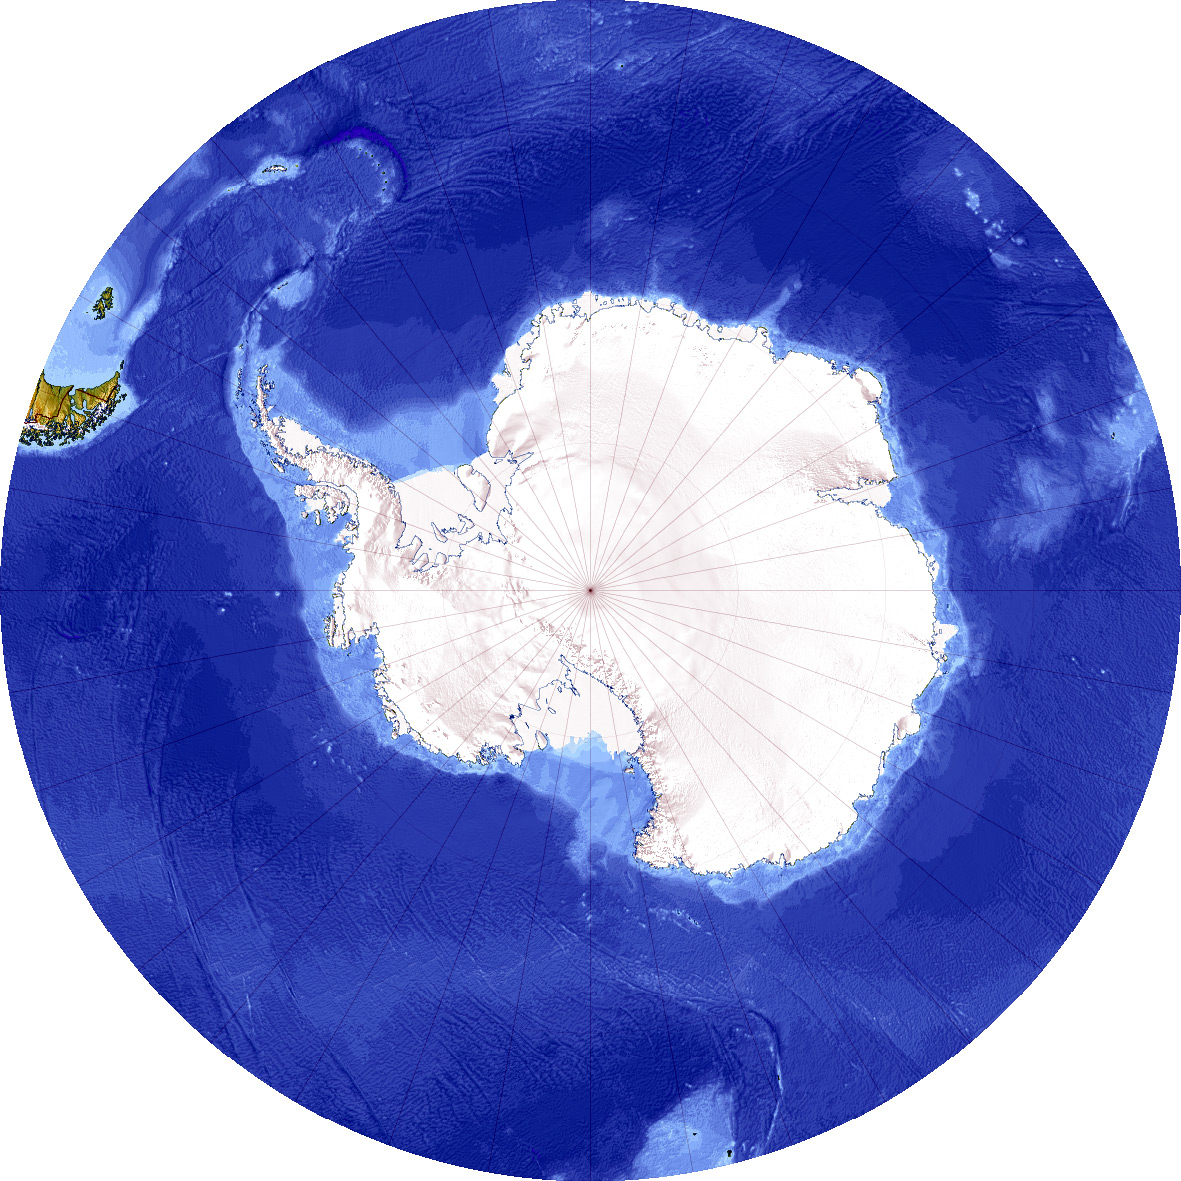 The Antarctic centered on the South Pole Land surrounded by sea